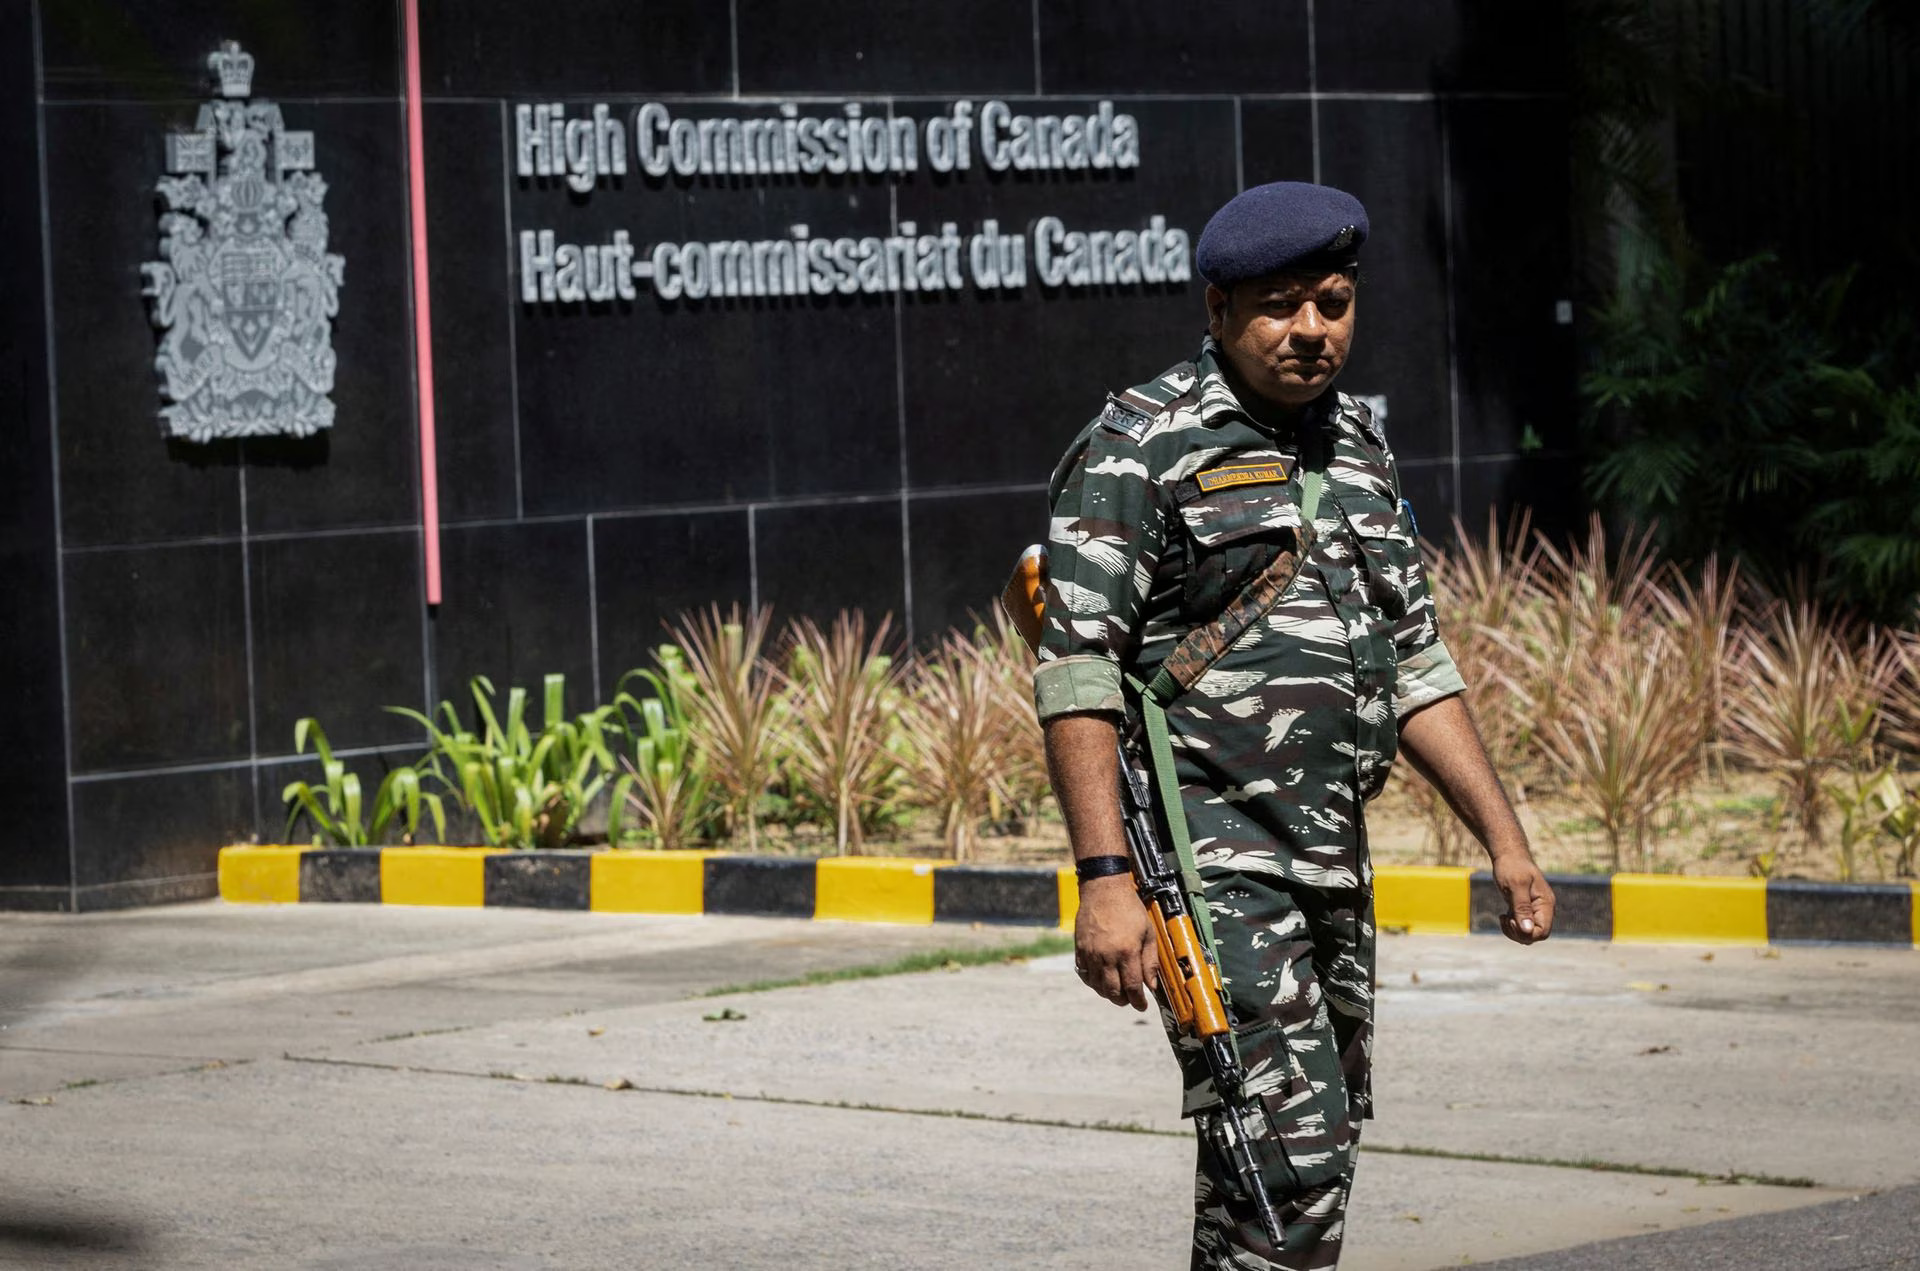 Diplomatic tensions surge as diplomats expelled: India and Canada clash over Sikh separatist allegations 